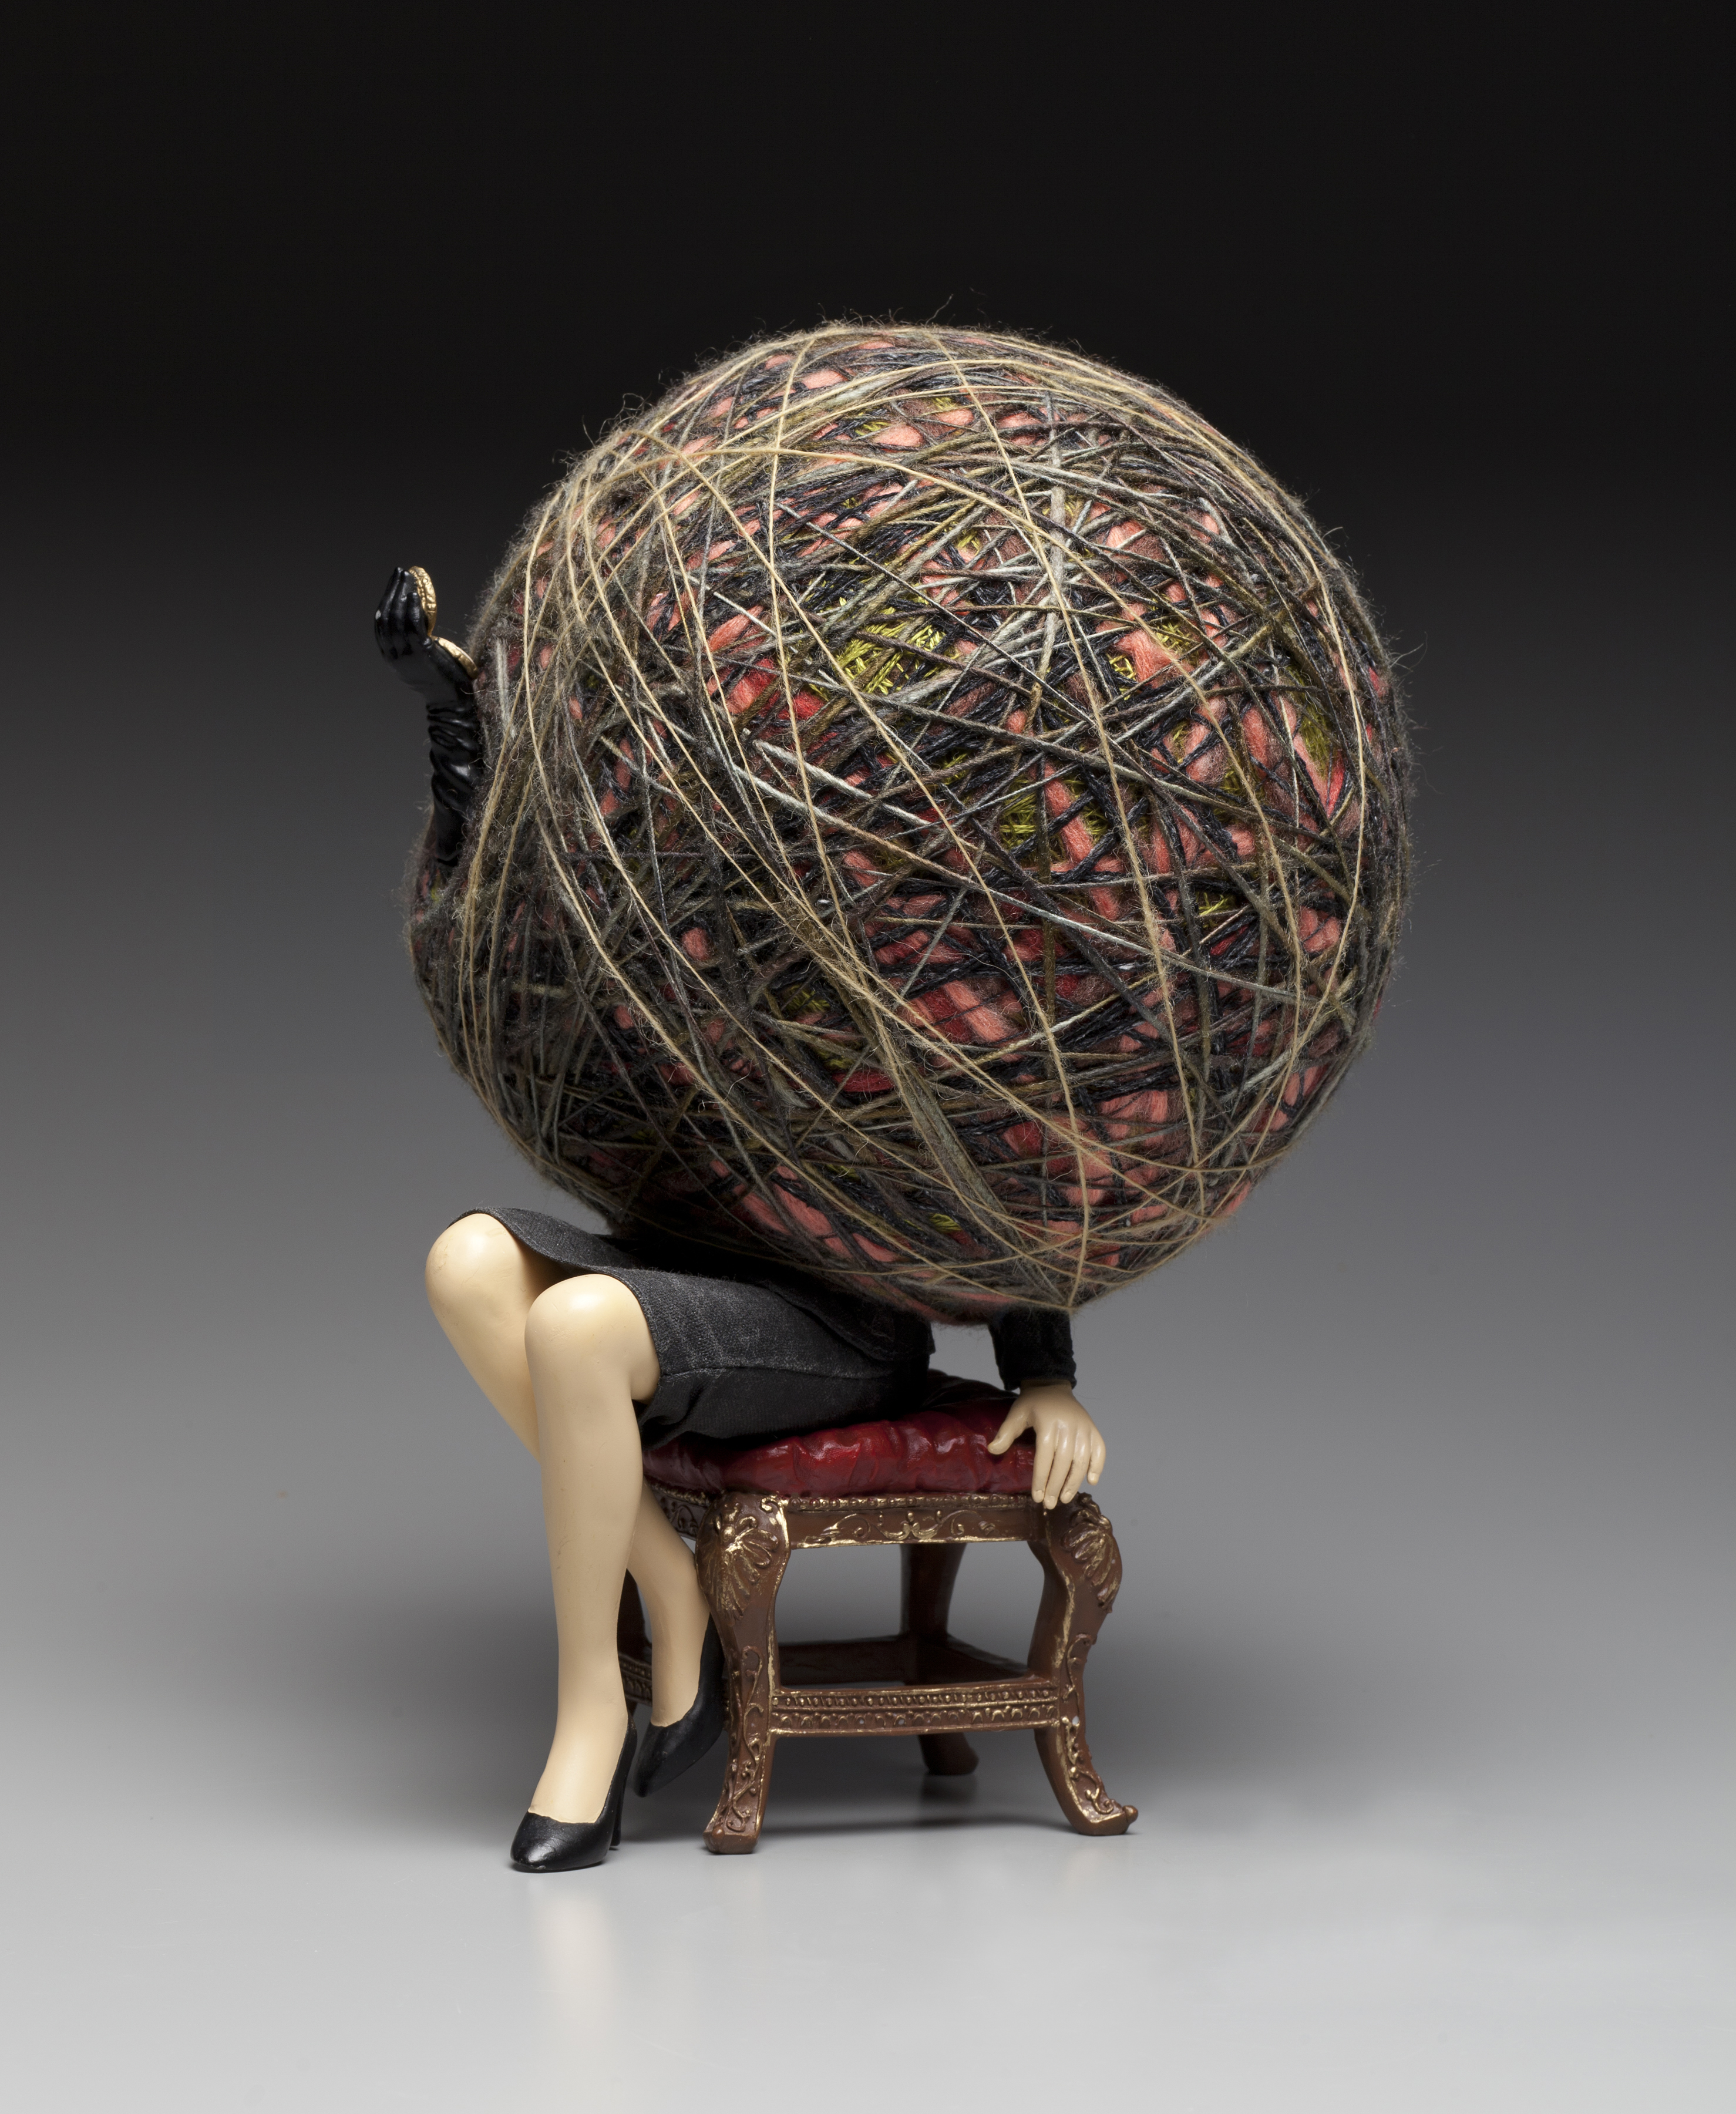 Small sculpture figure of an ornate chair with red cushion where the legs and one arm of a light skinned woman in a pencil skirt is seen. Her entire body is a ball of twine and threads.